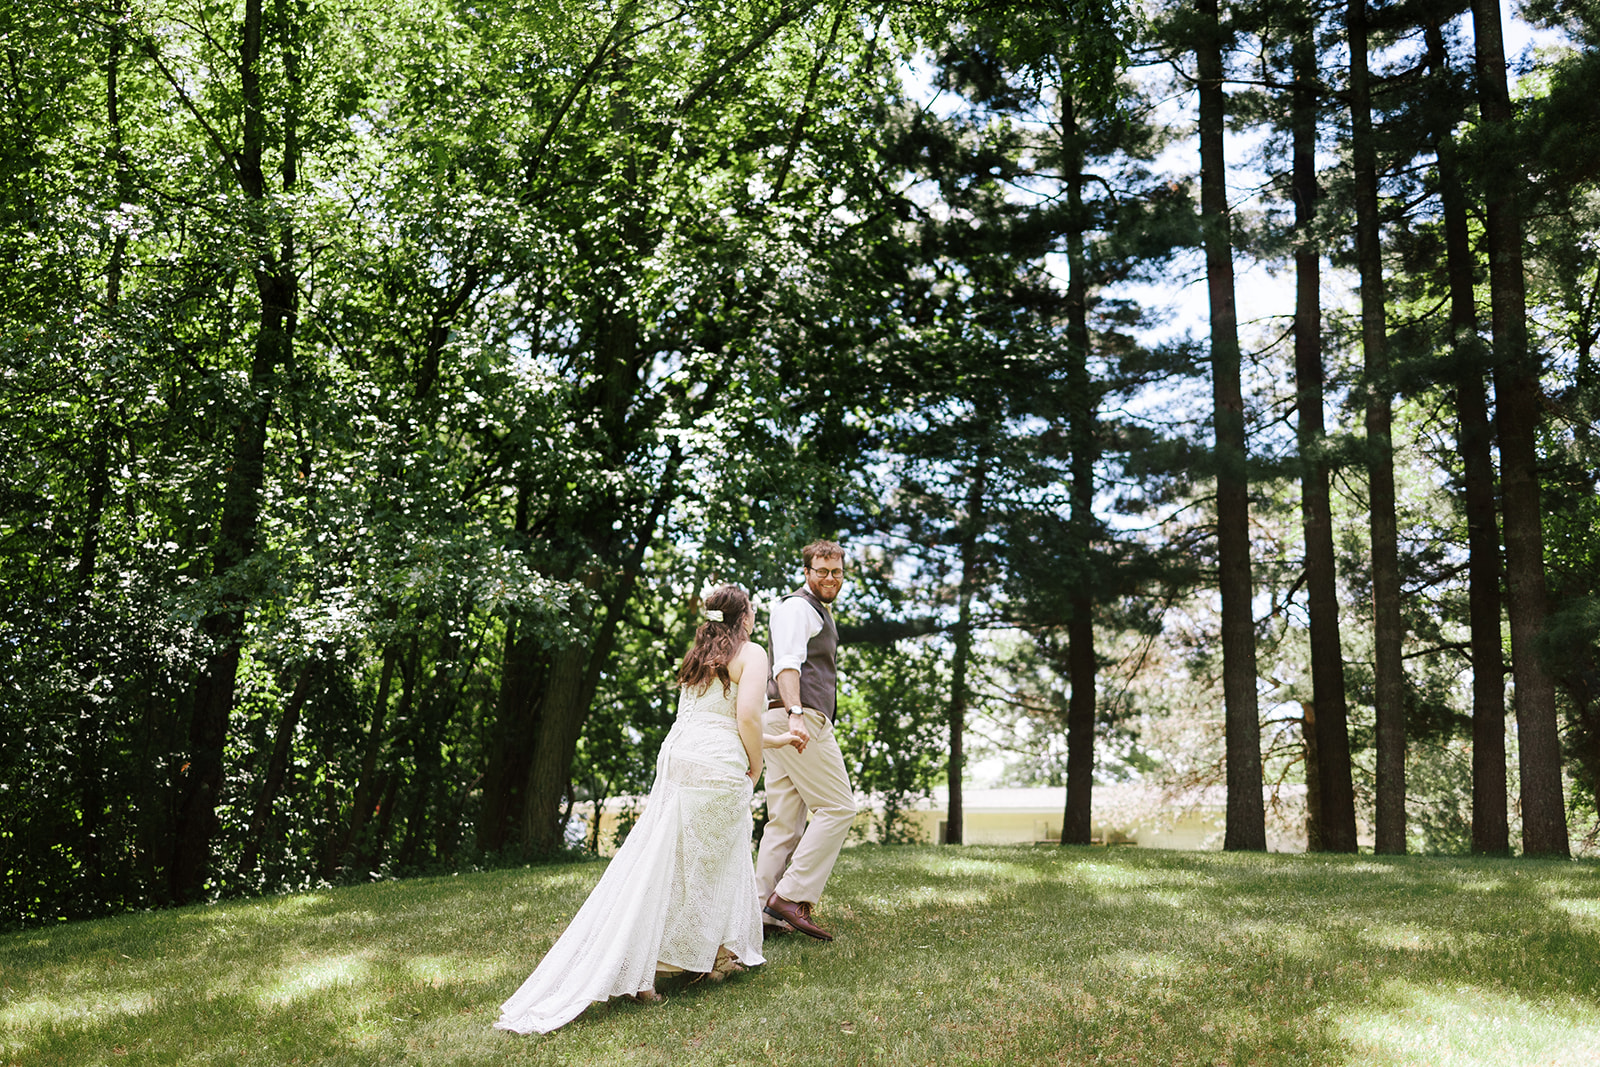 couple walks together after their first look during their intimate backyard wedding in central wisconsin